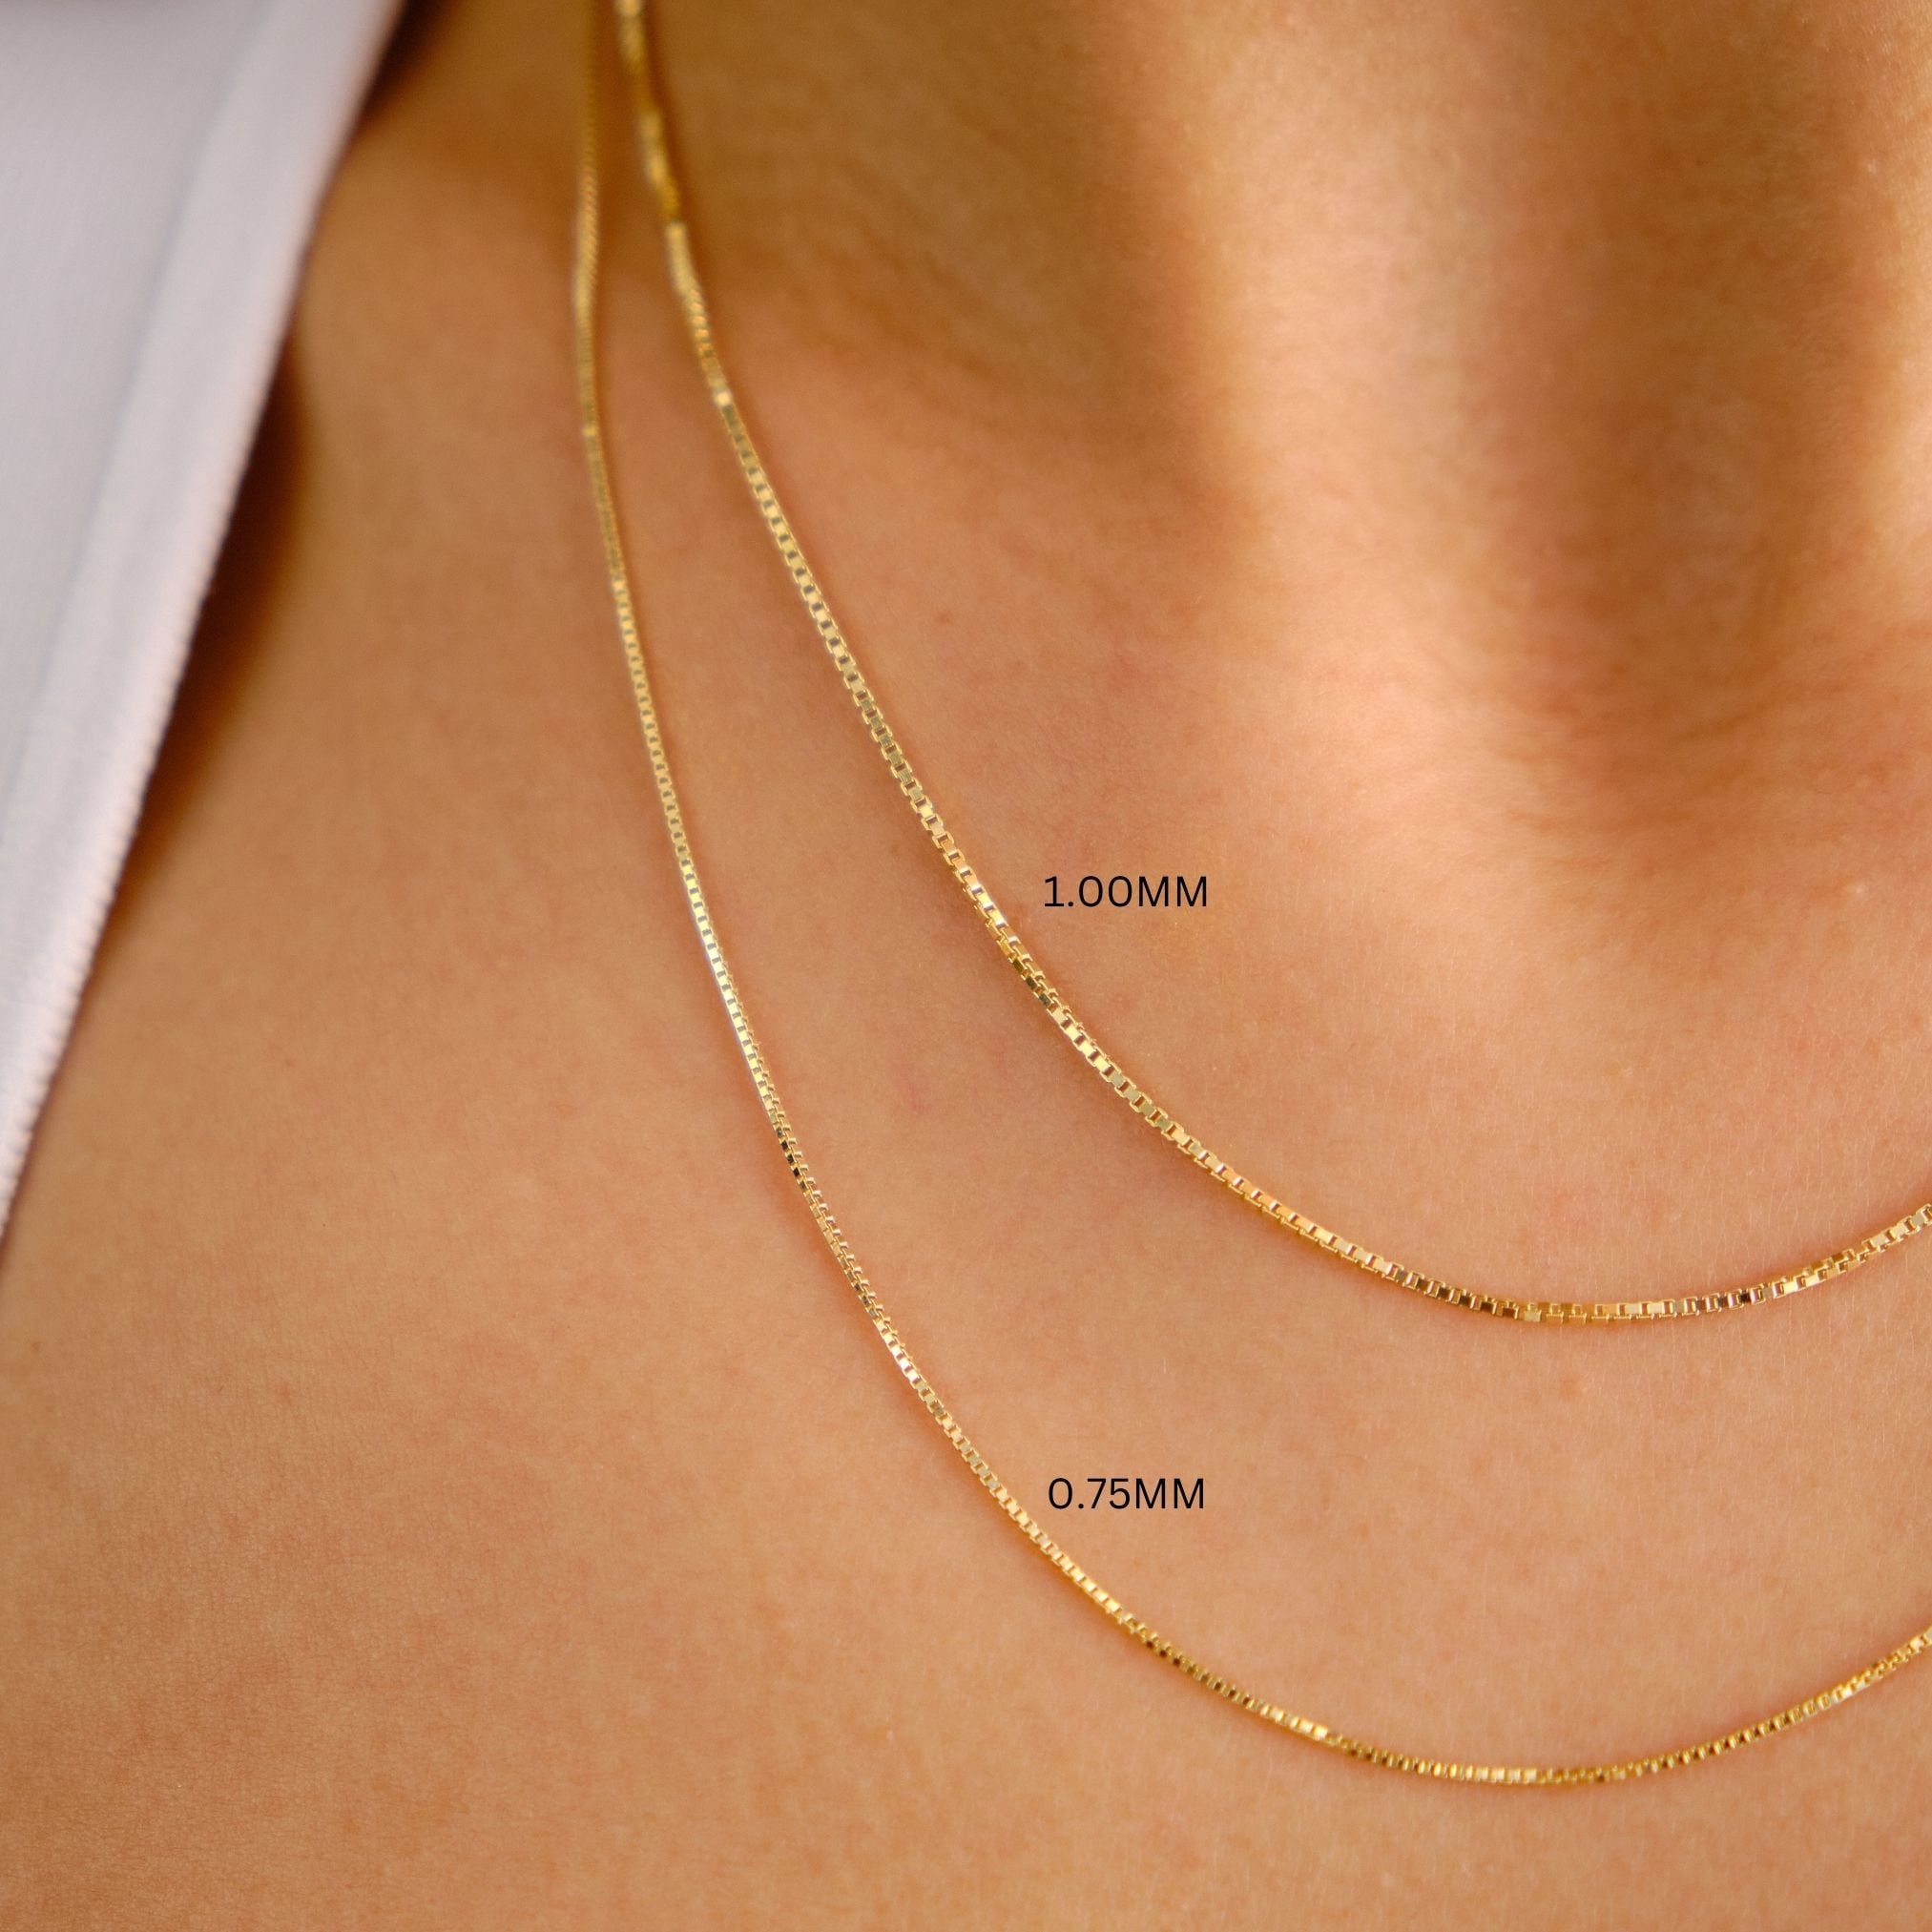 14K Gold Box Chain Necklace, 0.75mm 1mm Box Chain Necklace, Shiny